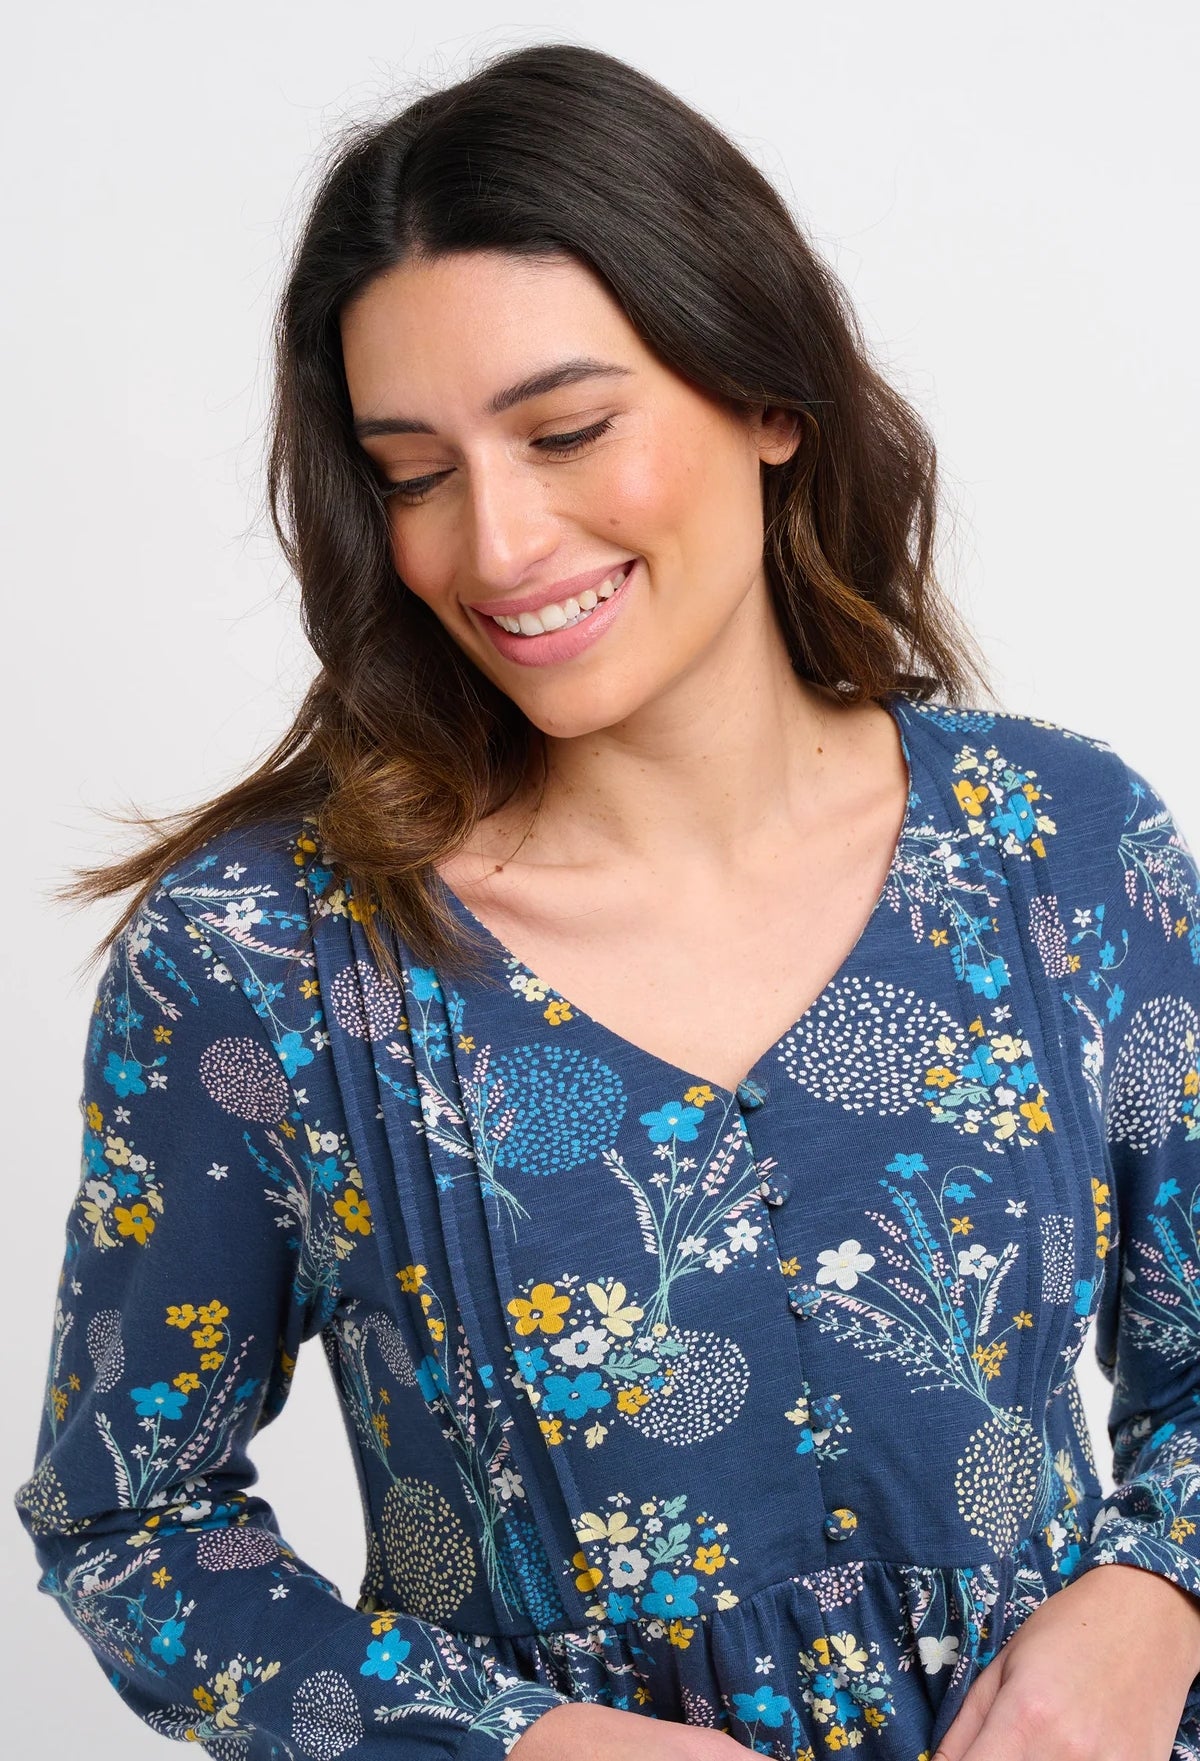 Women's tunic length long sleeve blouse in navy with Bursting Blooms floral print